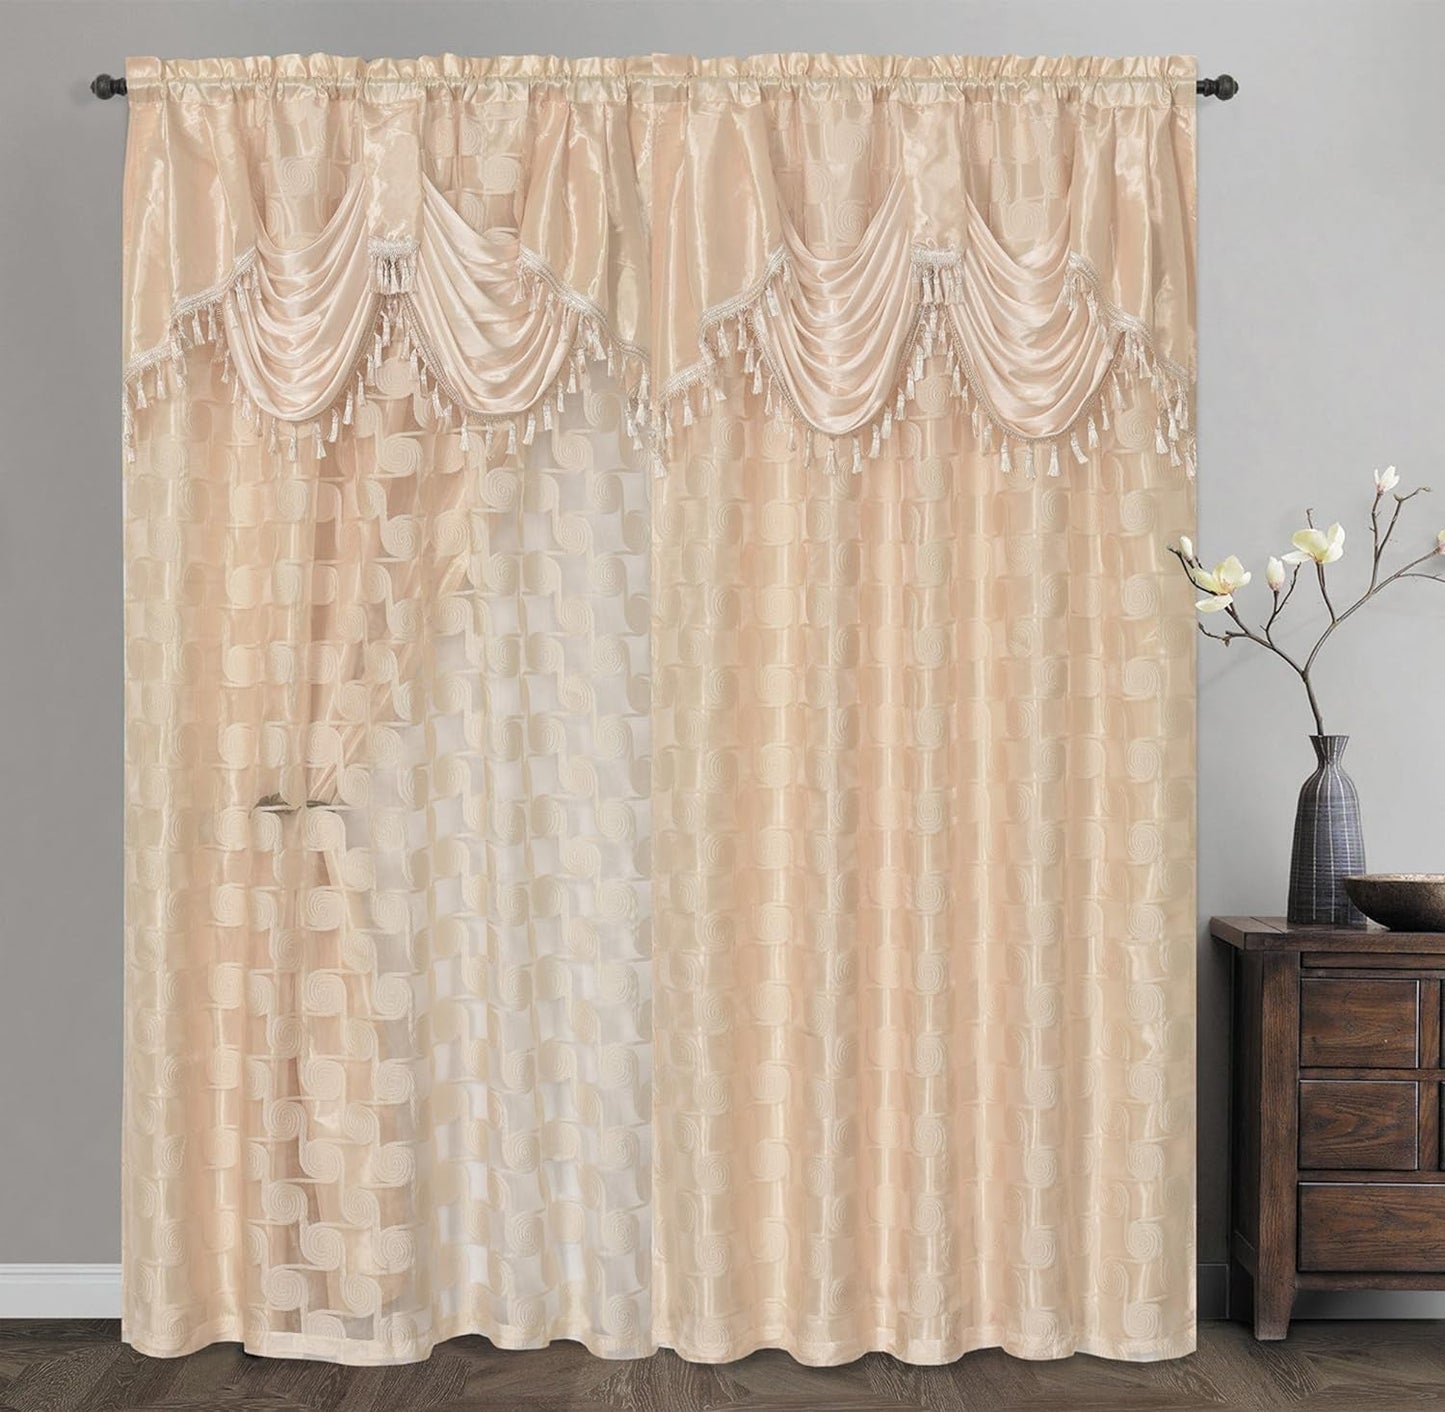 GOHD CIRCLE CYCLE. Clipped Voile. Voile Jacquard Window Curtain Drape with Attached Fancy Valance and Taffeta Backing. 2Pcs Set. Each Pc 54 Inch Wide X 84 Inch Drop + 18 Inch Valance. (COFFEE)